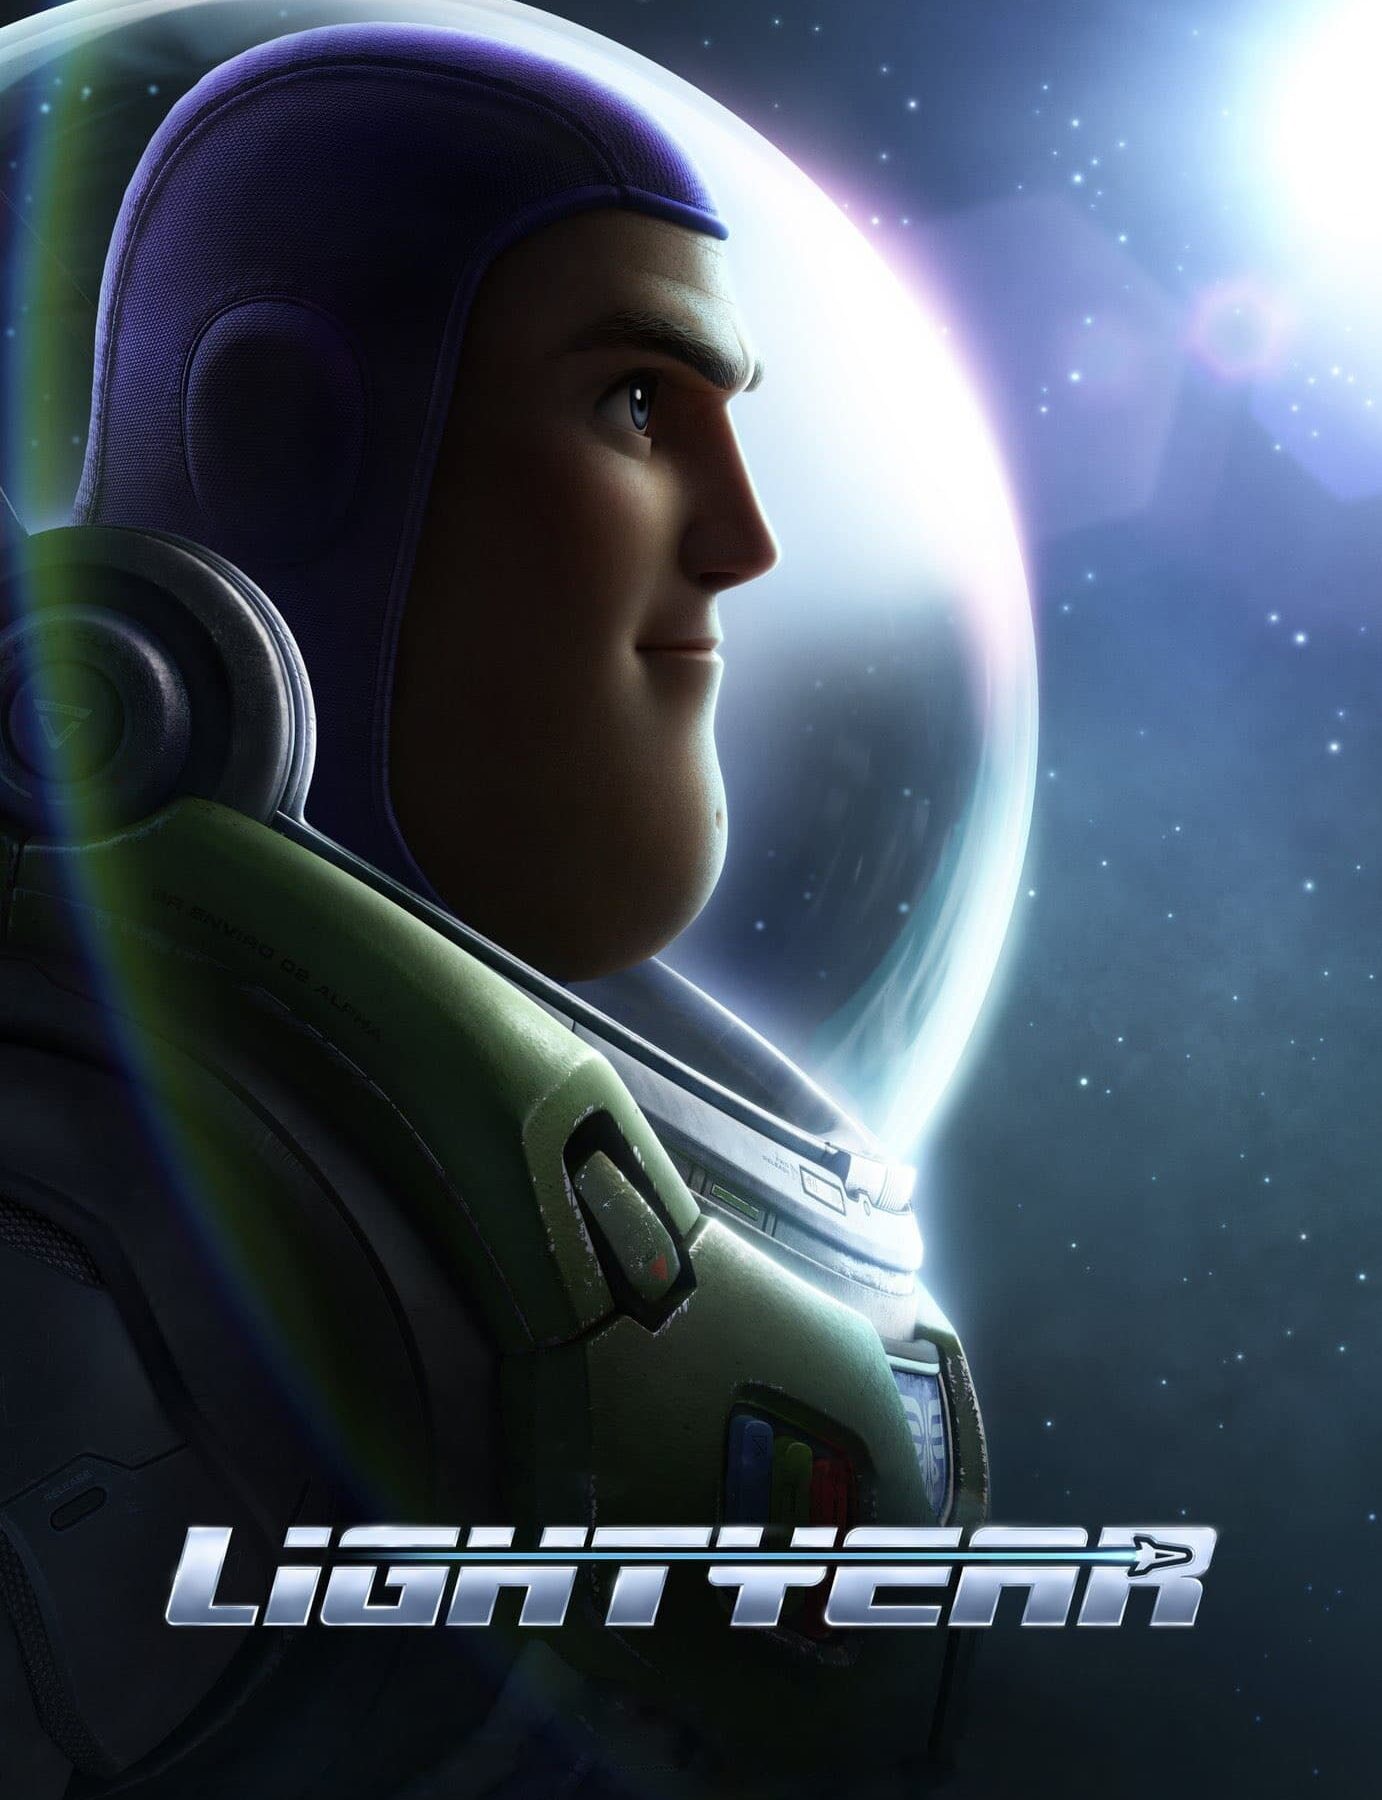 Poster for the movie "Lightyear"